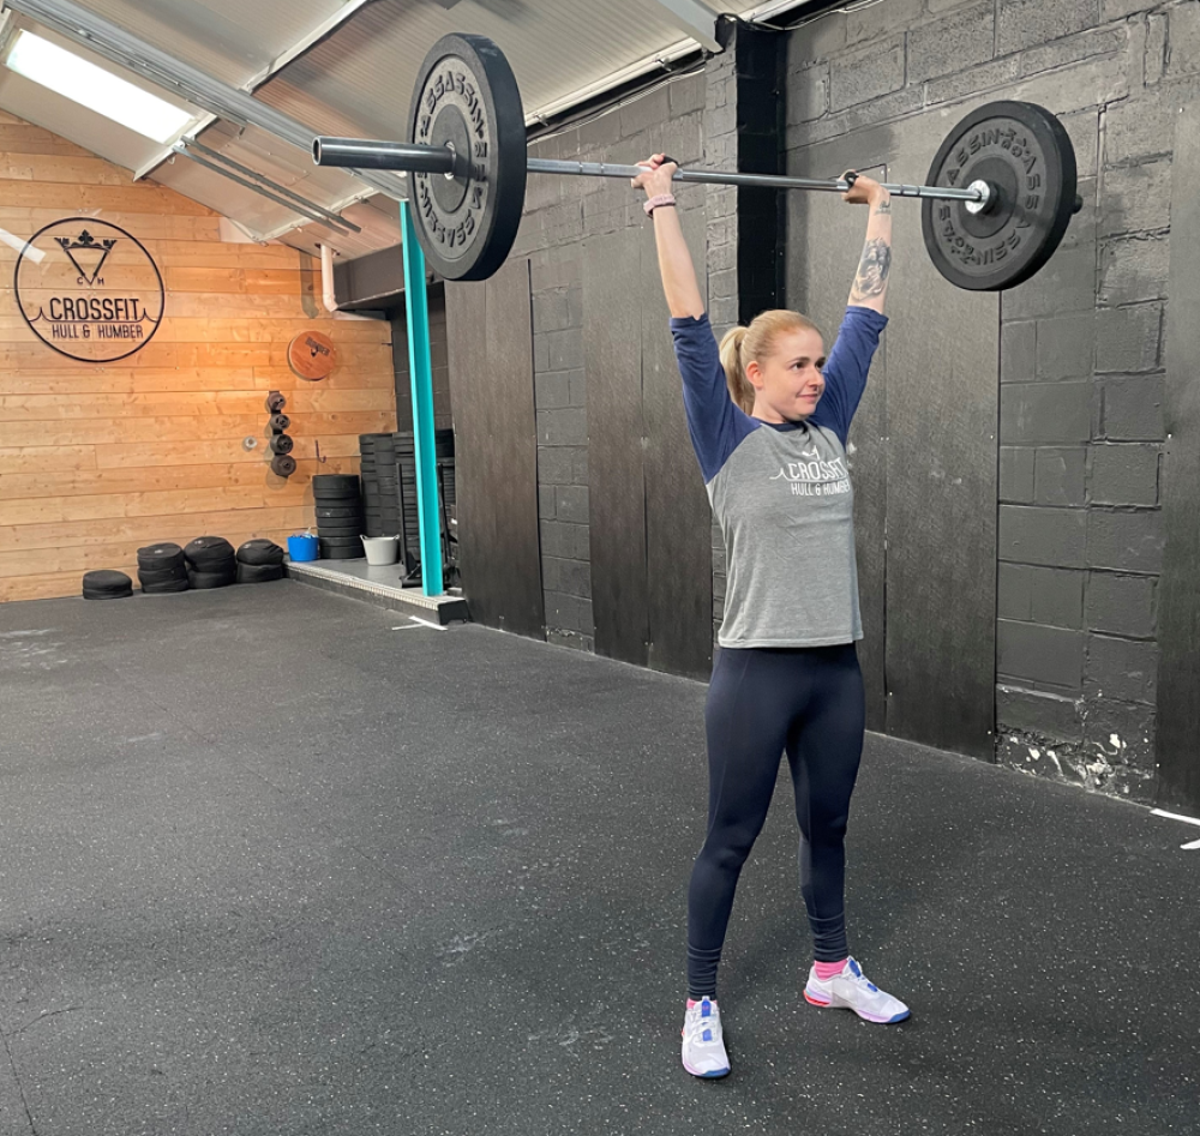 I’m pinching myself: Briton living with MS makes CrossFit world final